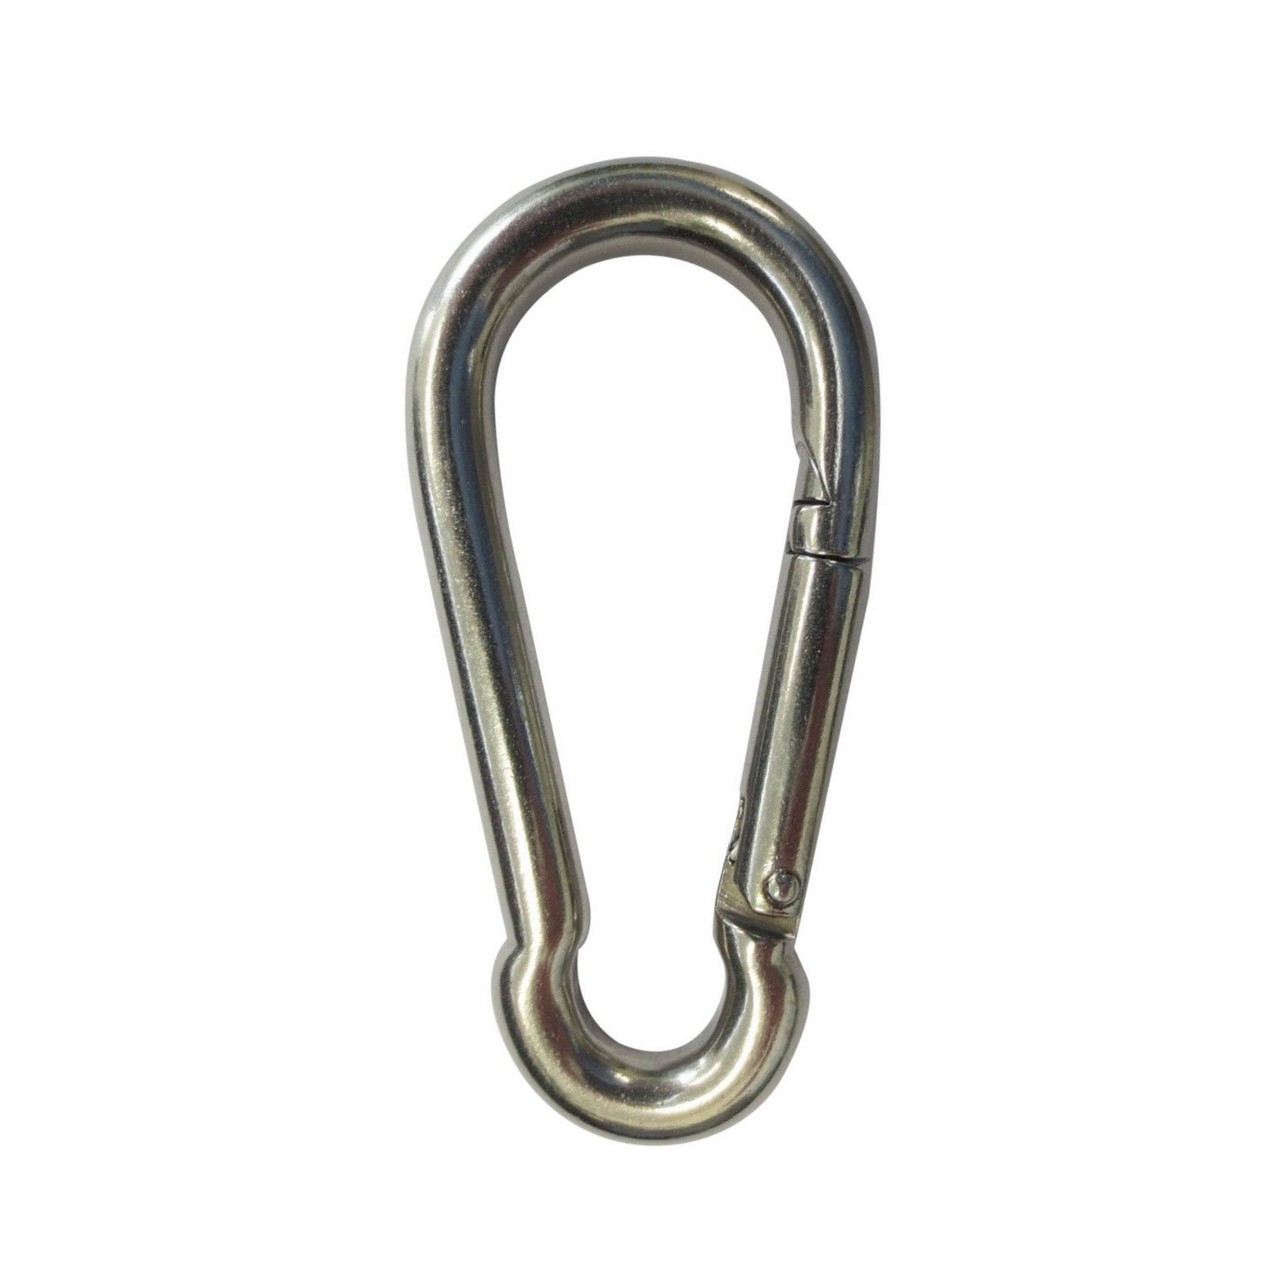 Snap Hooks - 4.0mm - Stainless Steel Marine Grade 316 - Chain Direct